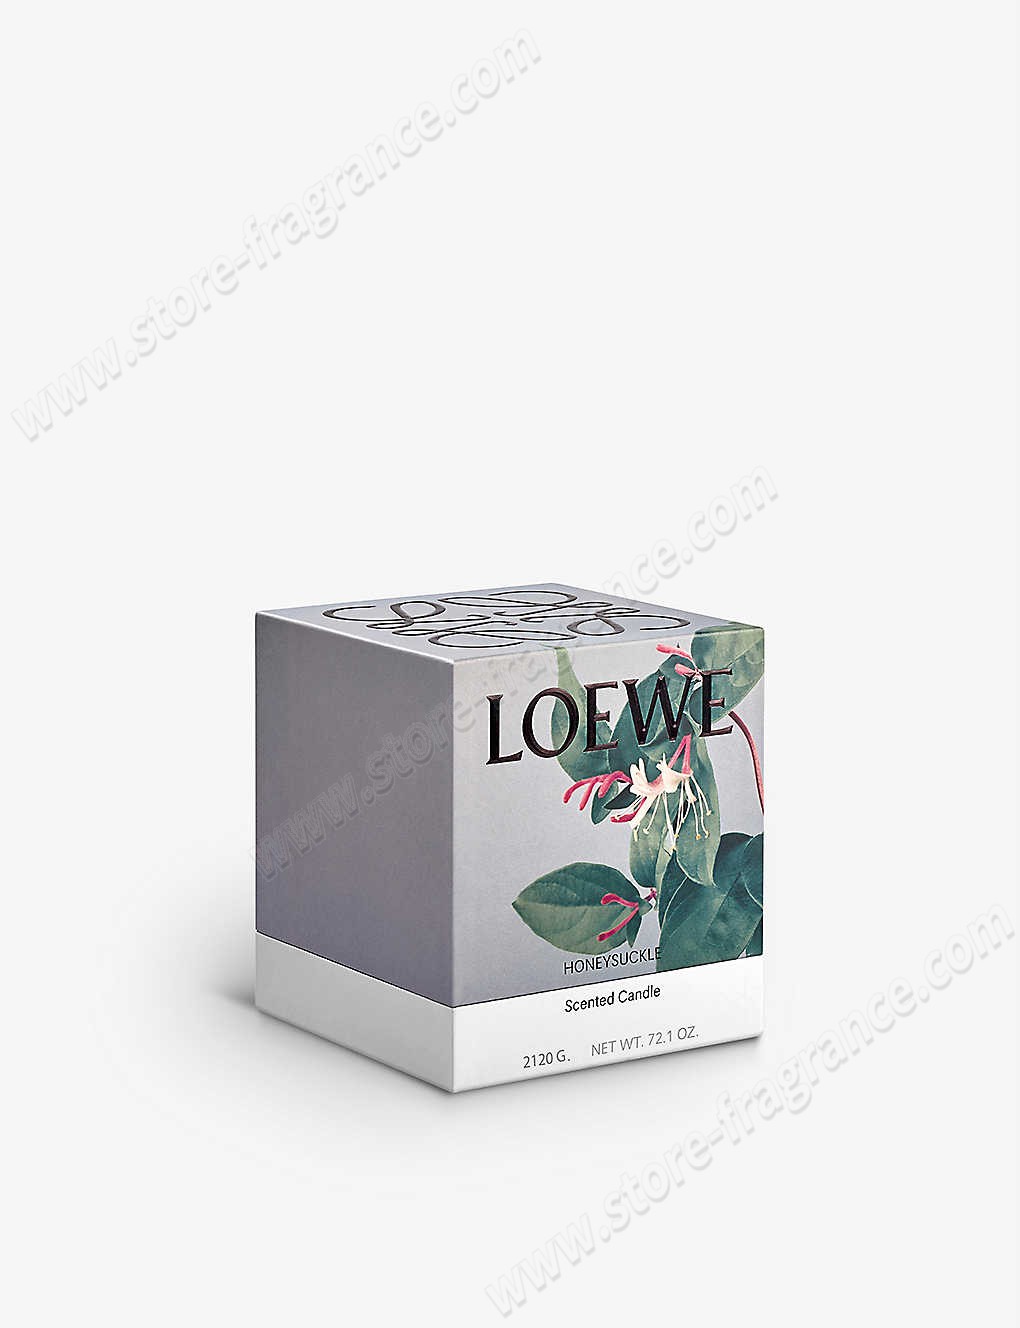 LOEWE/Honeysuckle large scented candle 2120g ✿ Discount Store - -1